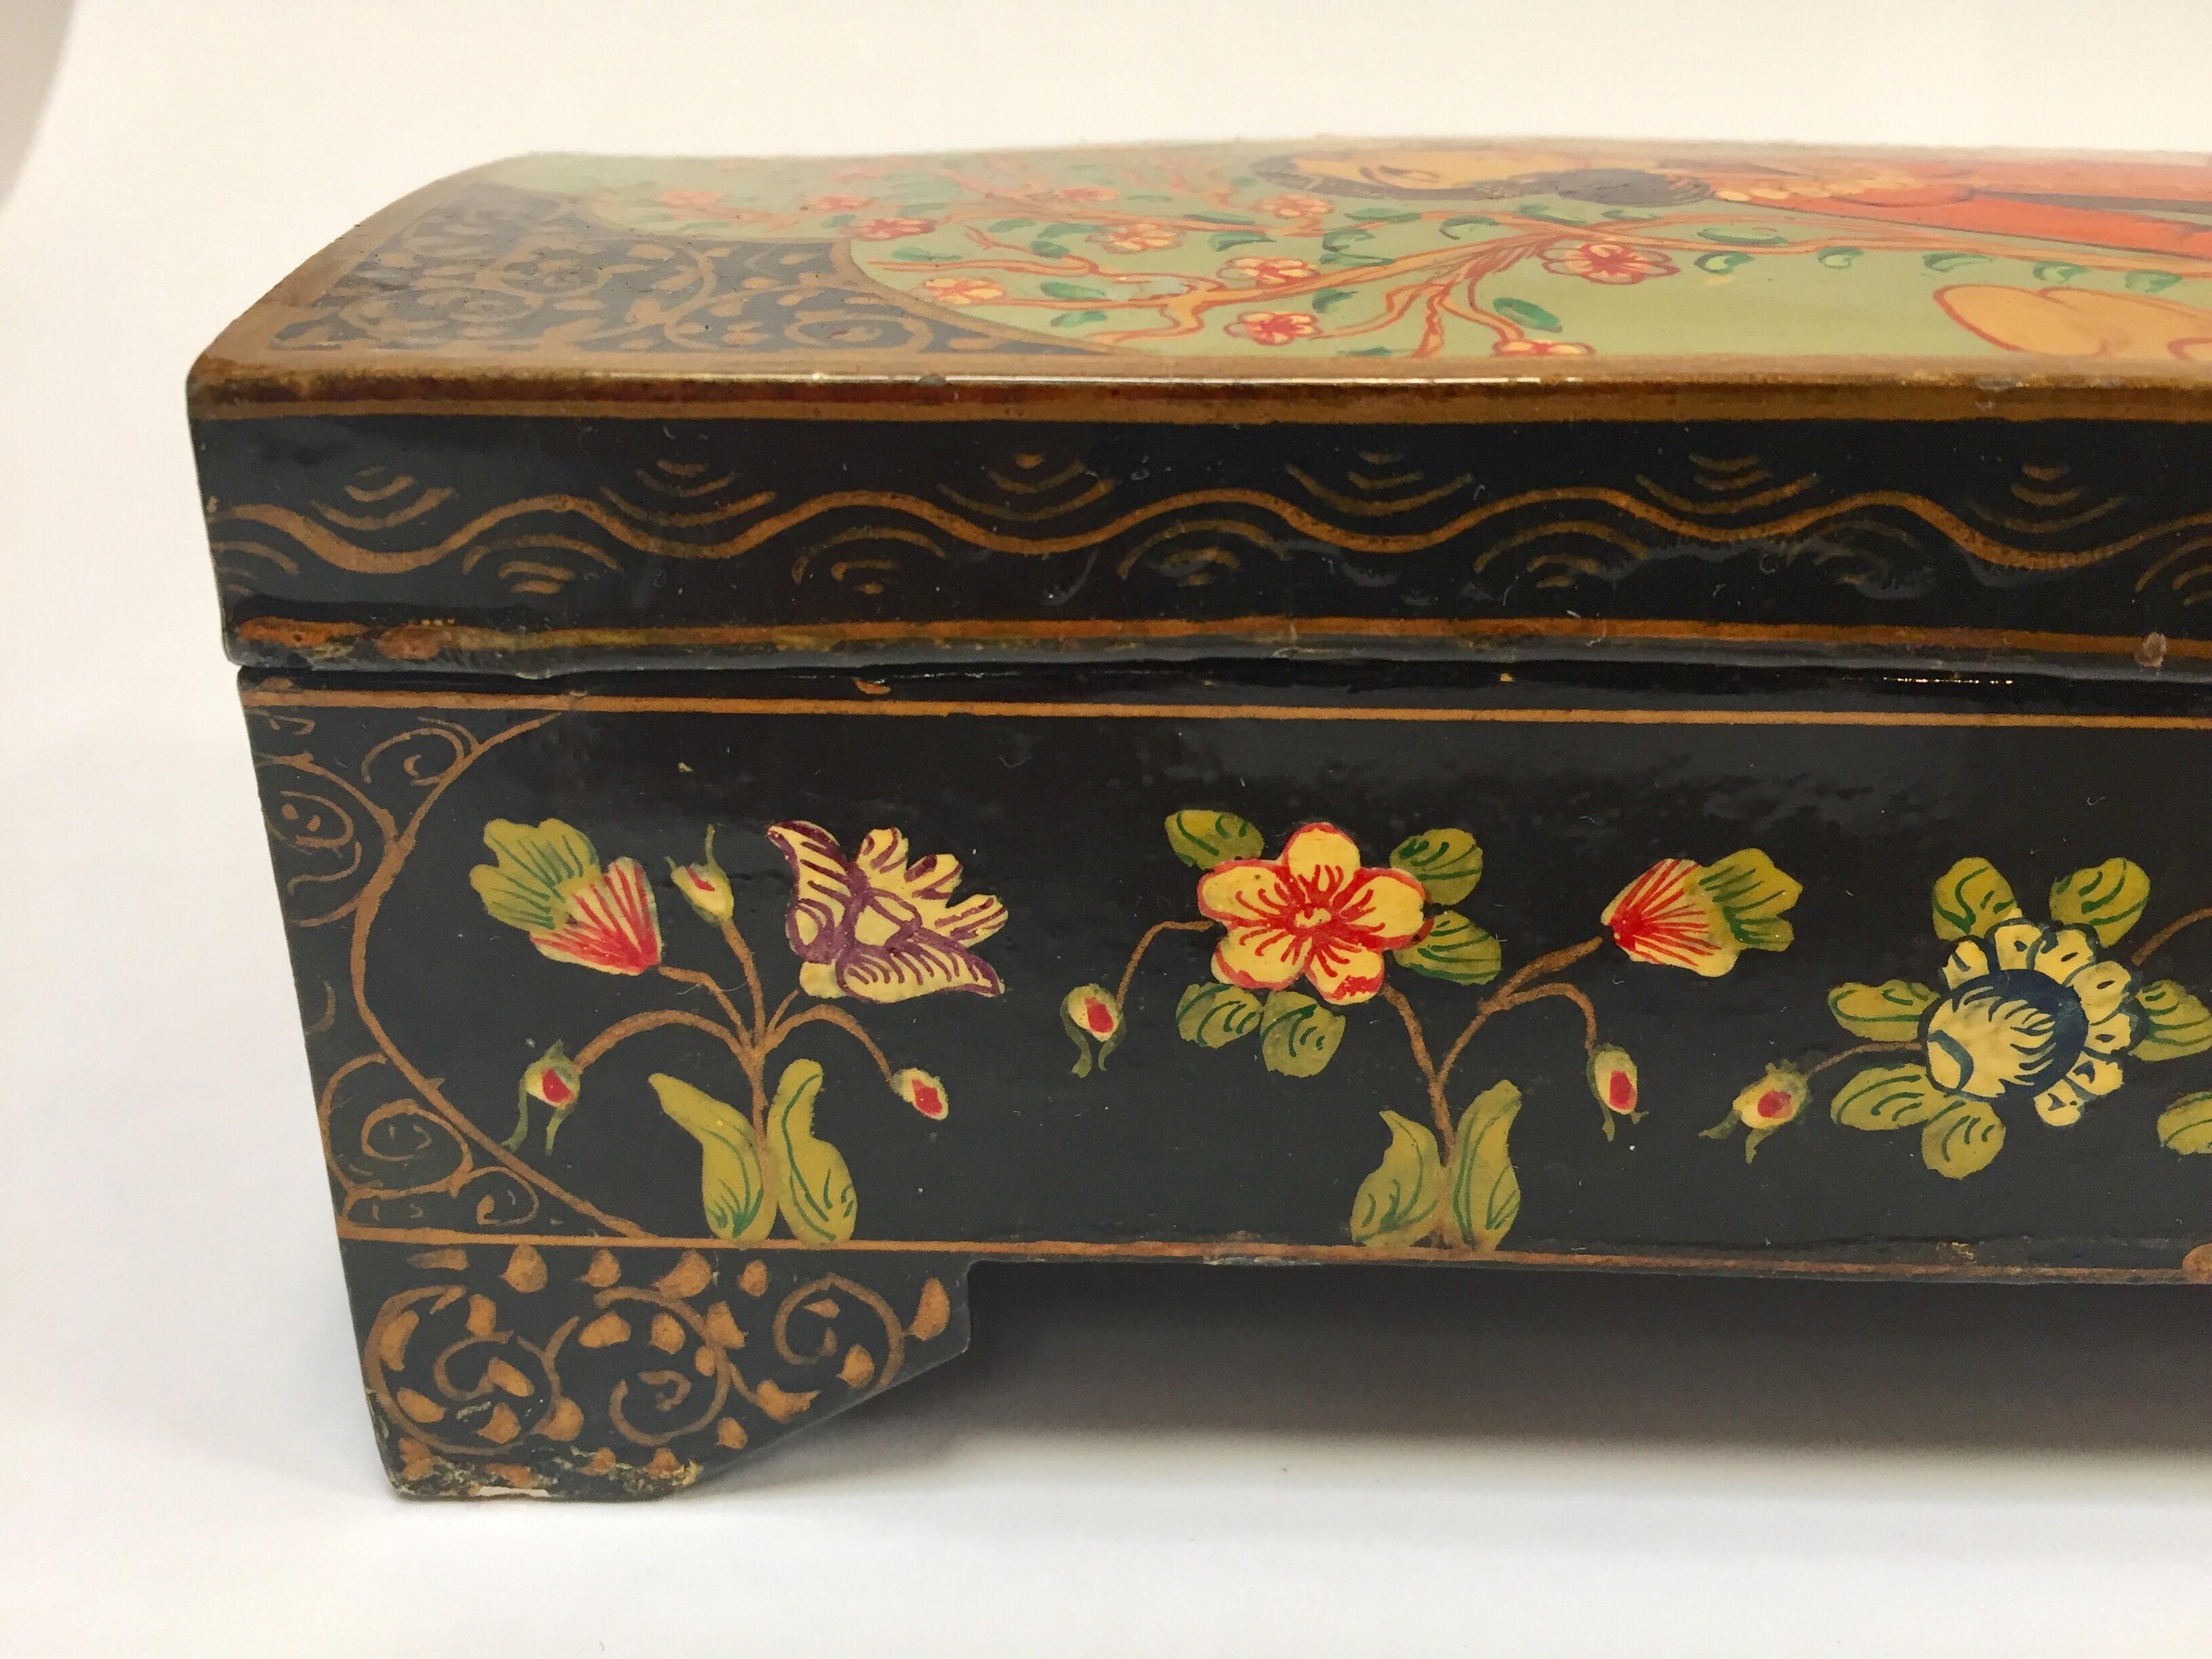 Wood Lacquer Pen Box Hand Painted with Harem Girls Playing and Dancing